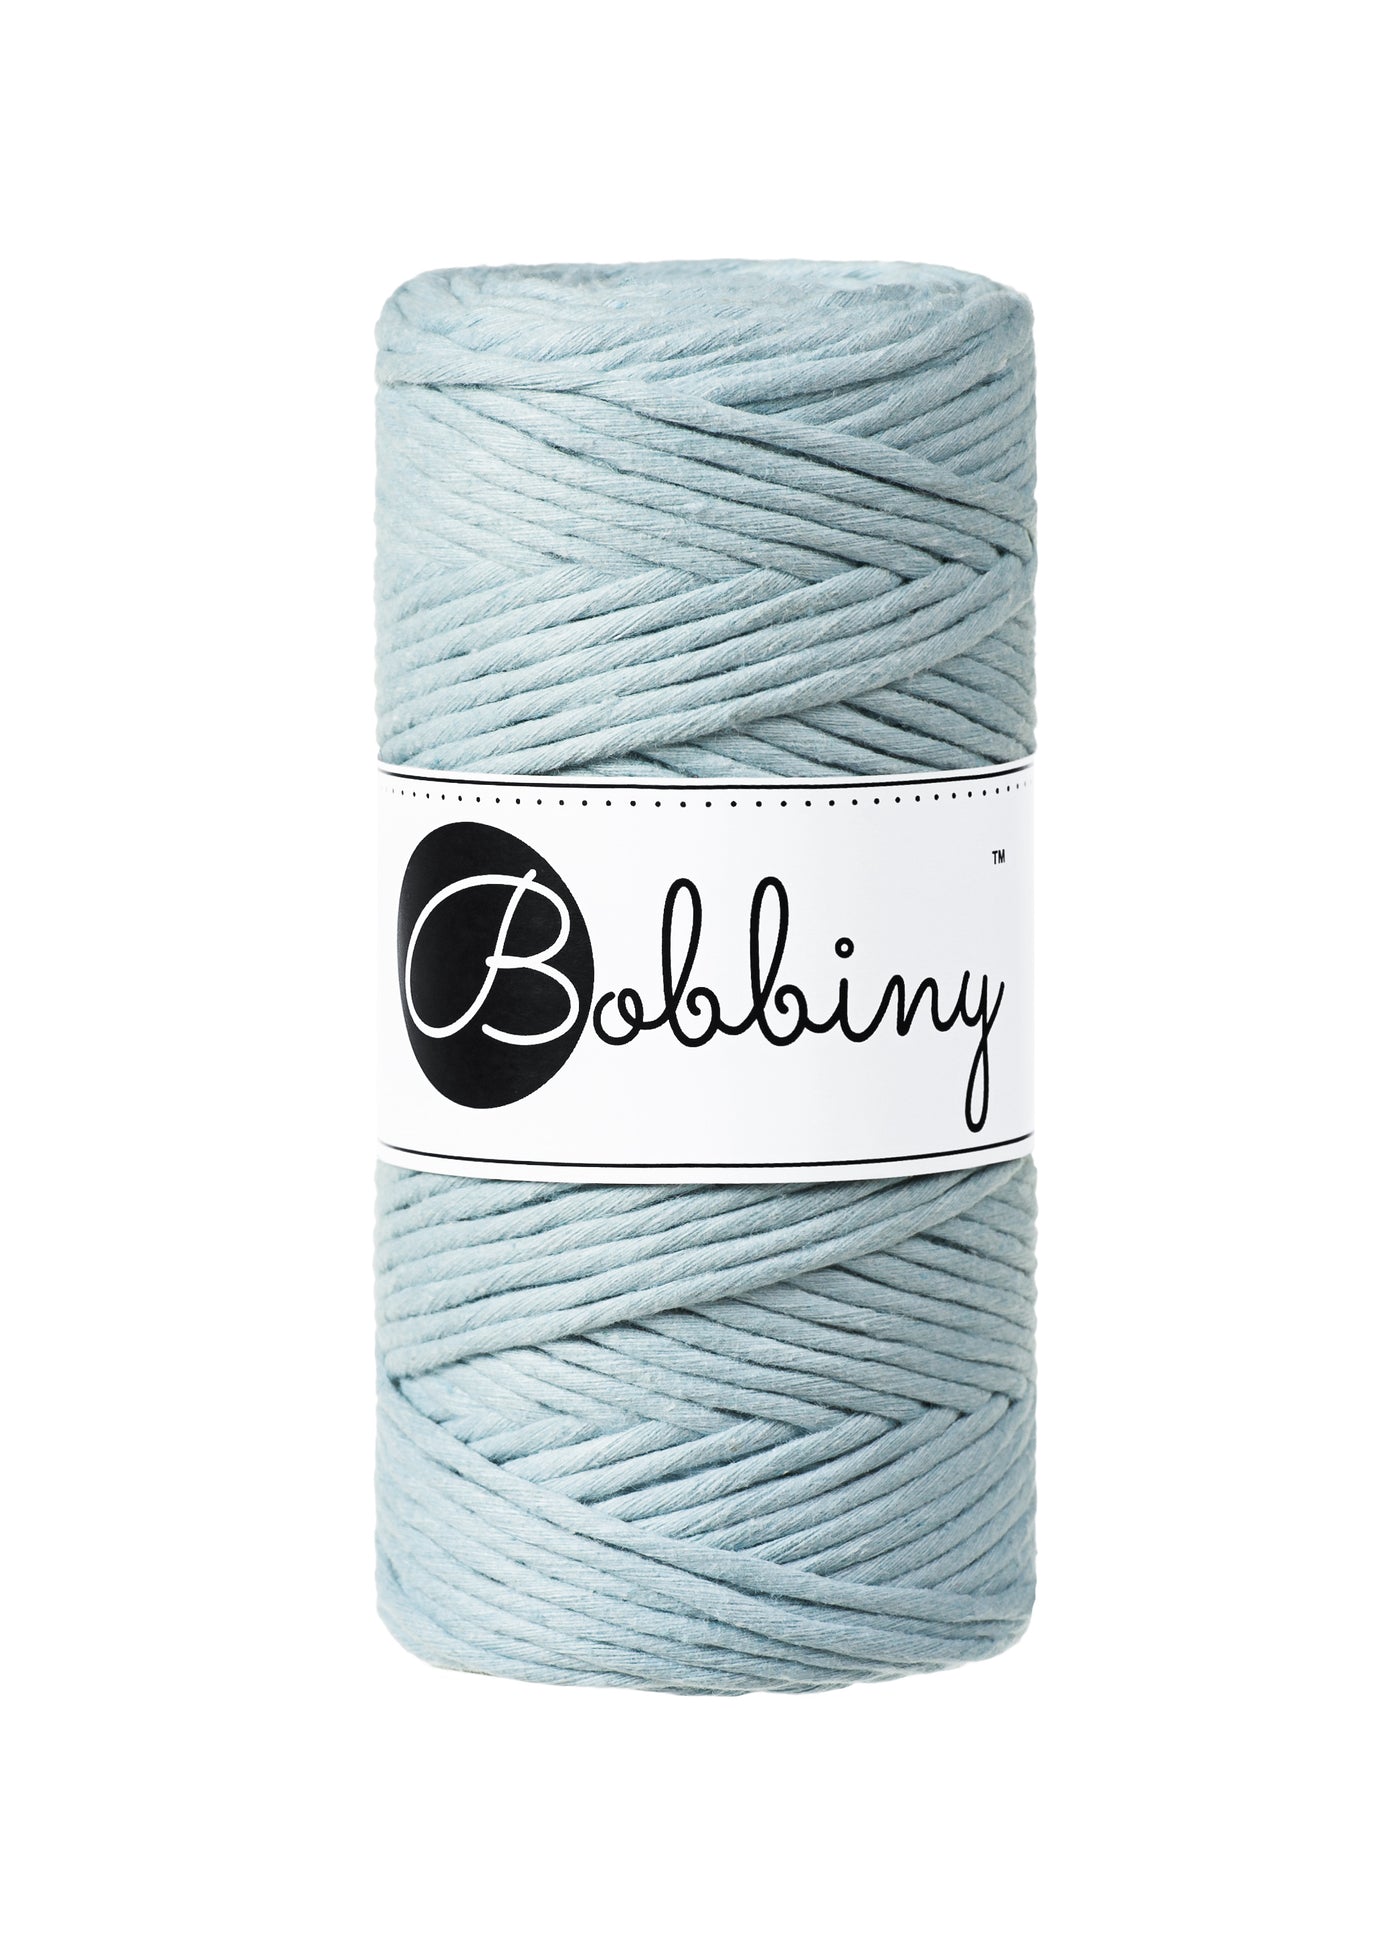 This super soft cord is perfect for Macrame or any other fibre art, and makes the most spectacular fringes and tassels.  It is made from 100% recycled cotton, is single twist and contains 56 individual fibres.  It contains no harmful substances and is approved to Oeko-Tex standards.  The inner spool is made from recycled paper and is biodegradable.  Length 100m (108 yards)  Weight 330 gms  Consistent colour guaranteed